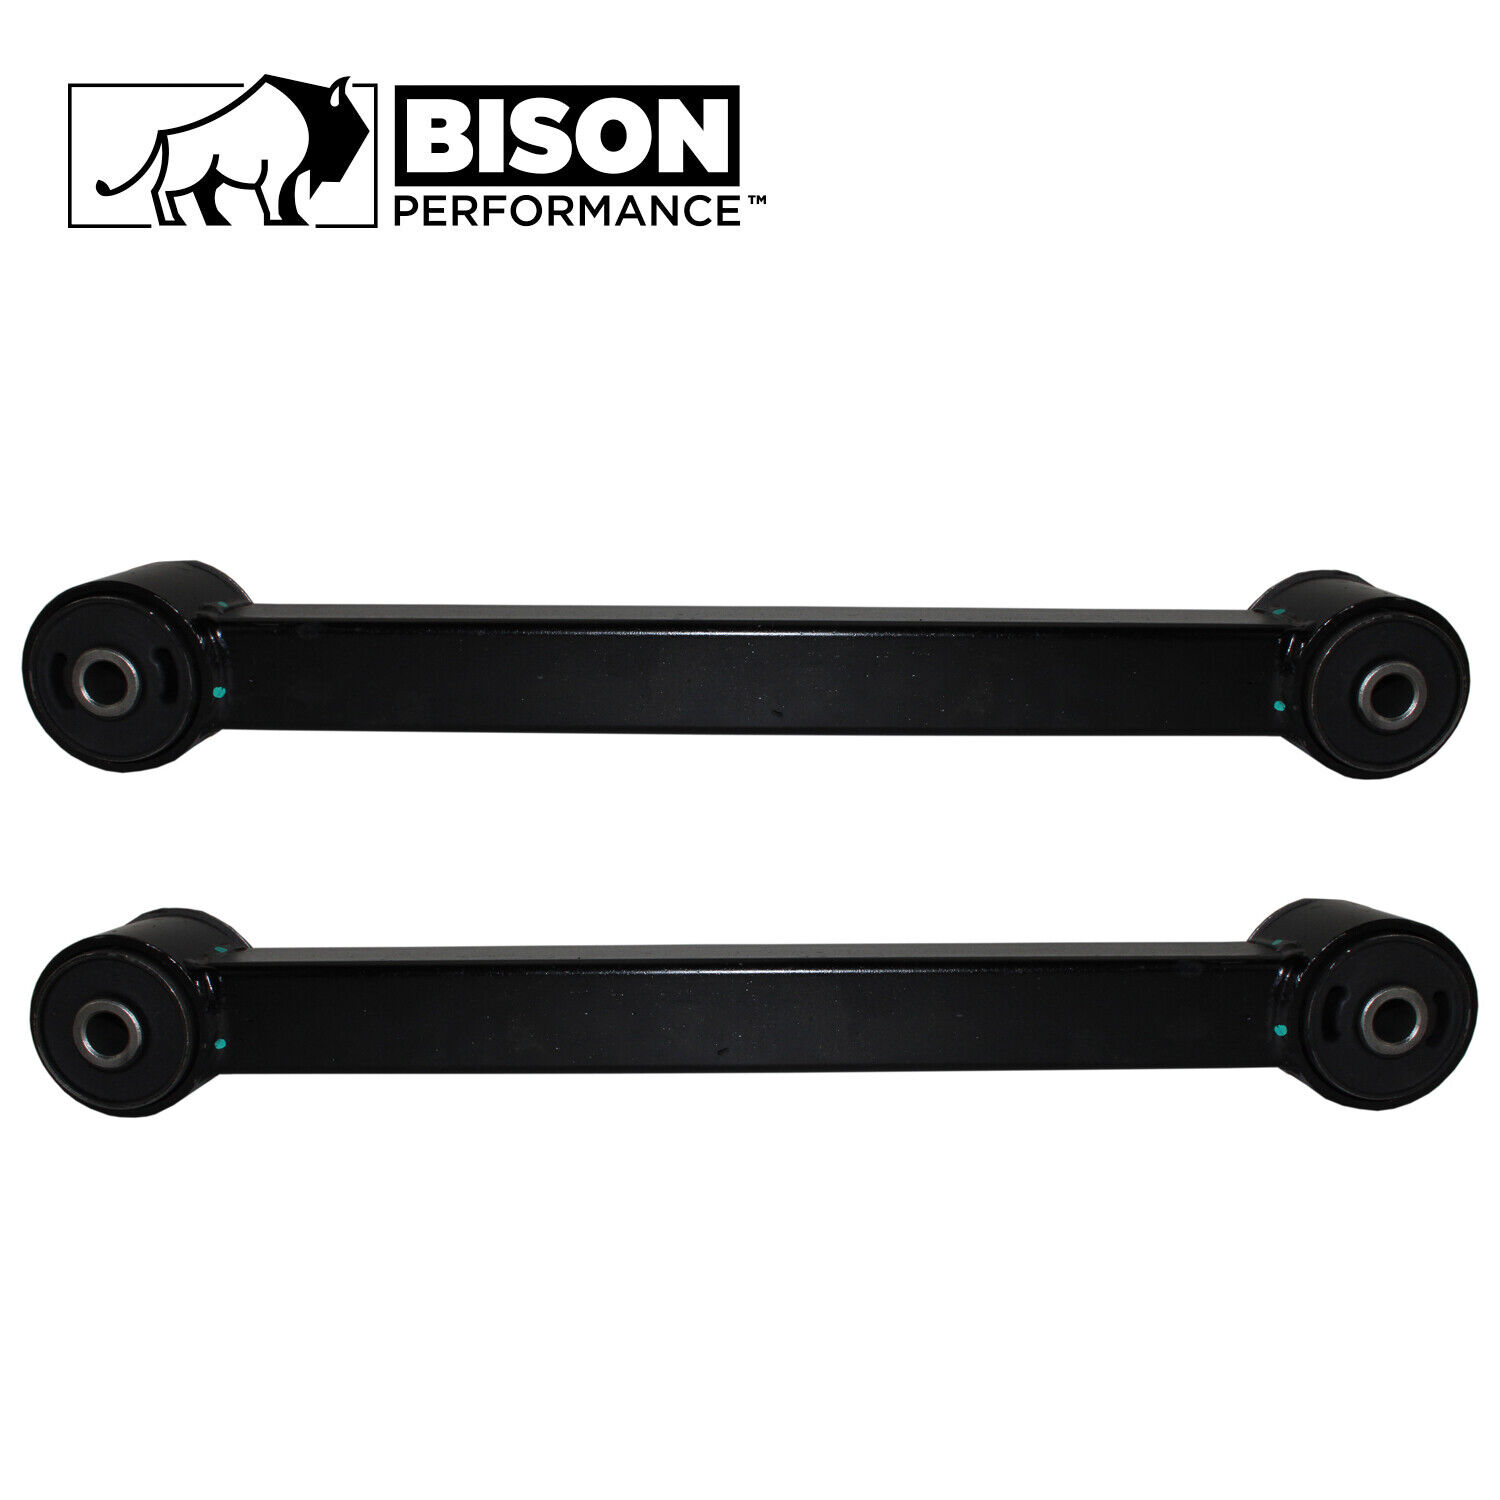 Bison Performance 2pc Set Rear Lower Lateral Arms For Nitro Commander Liberty